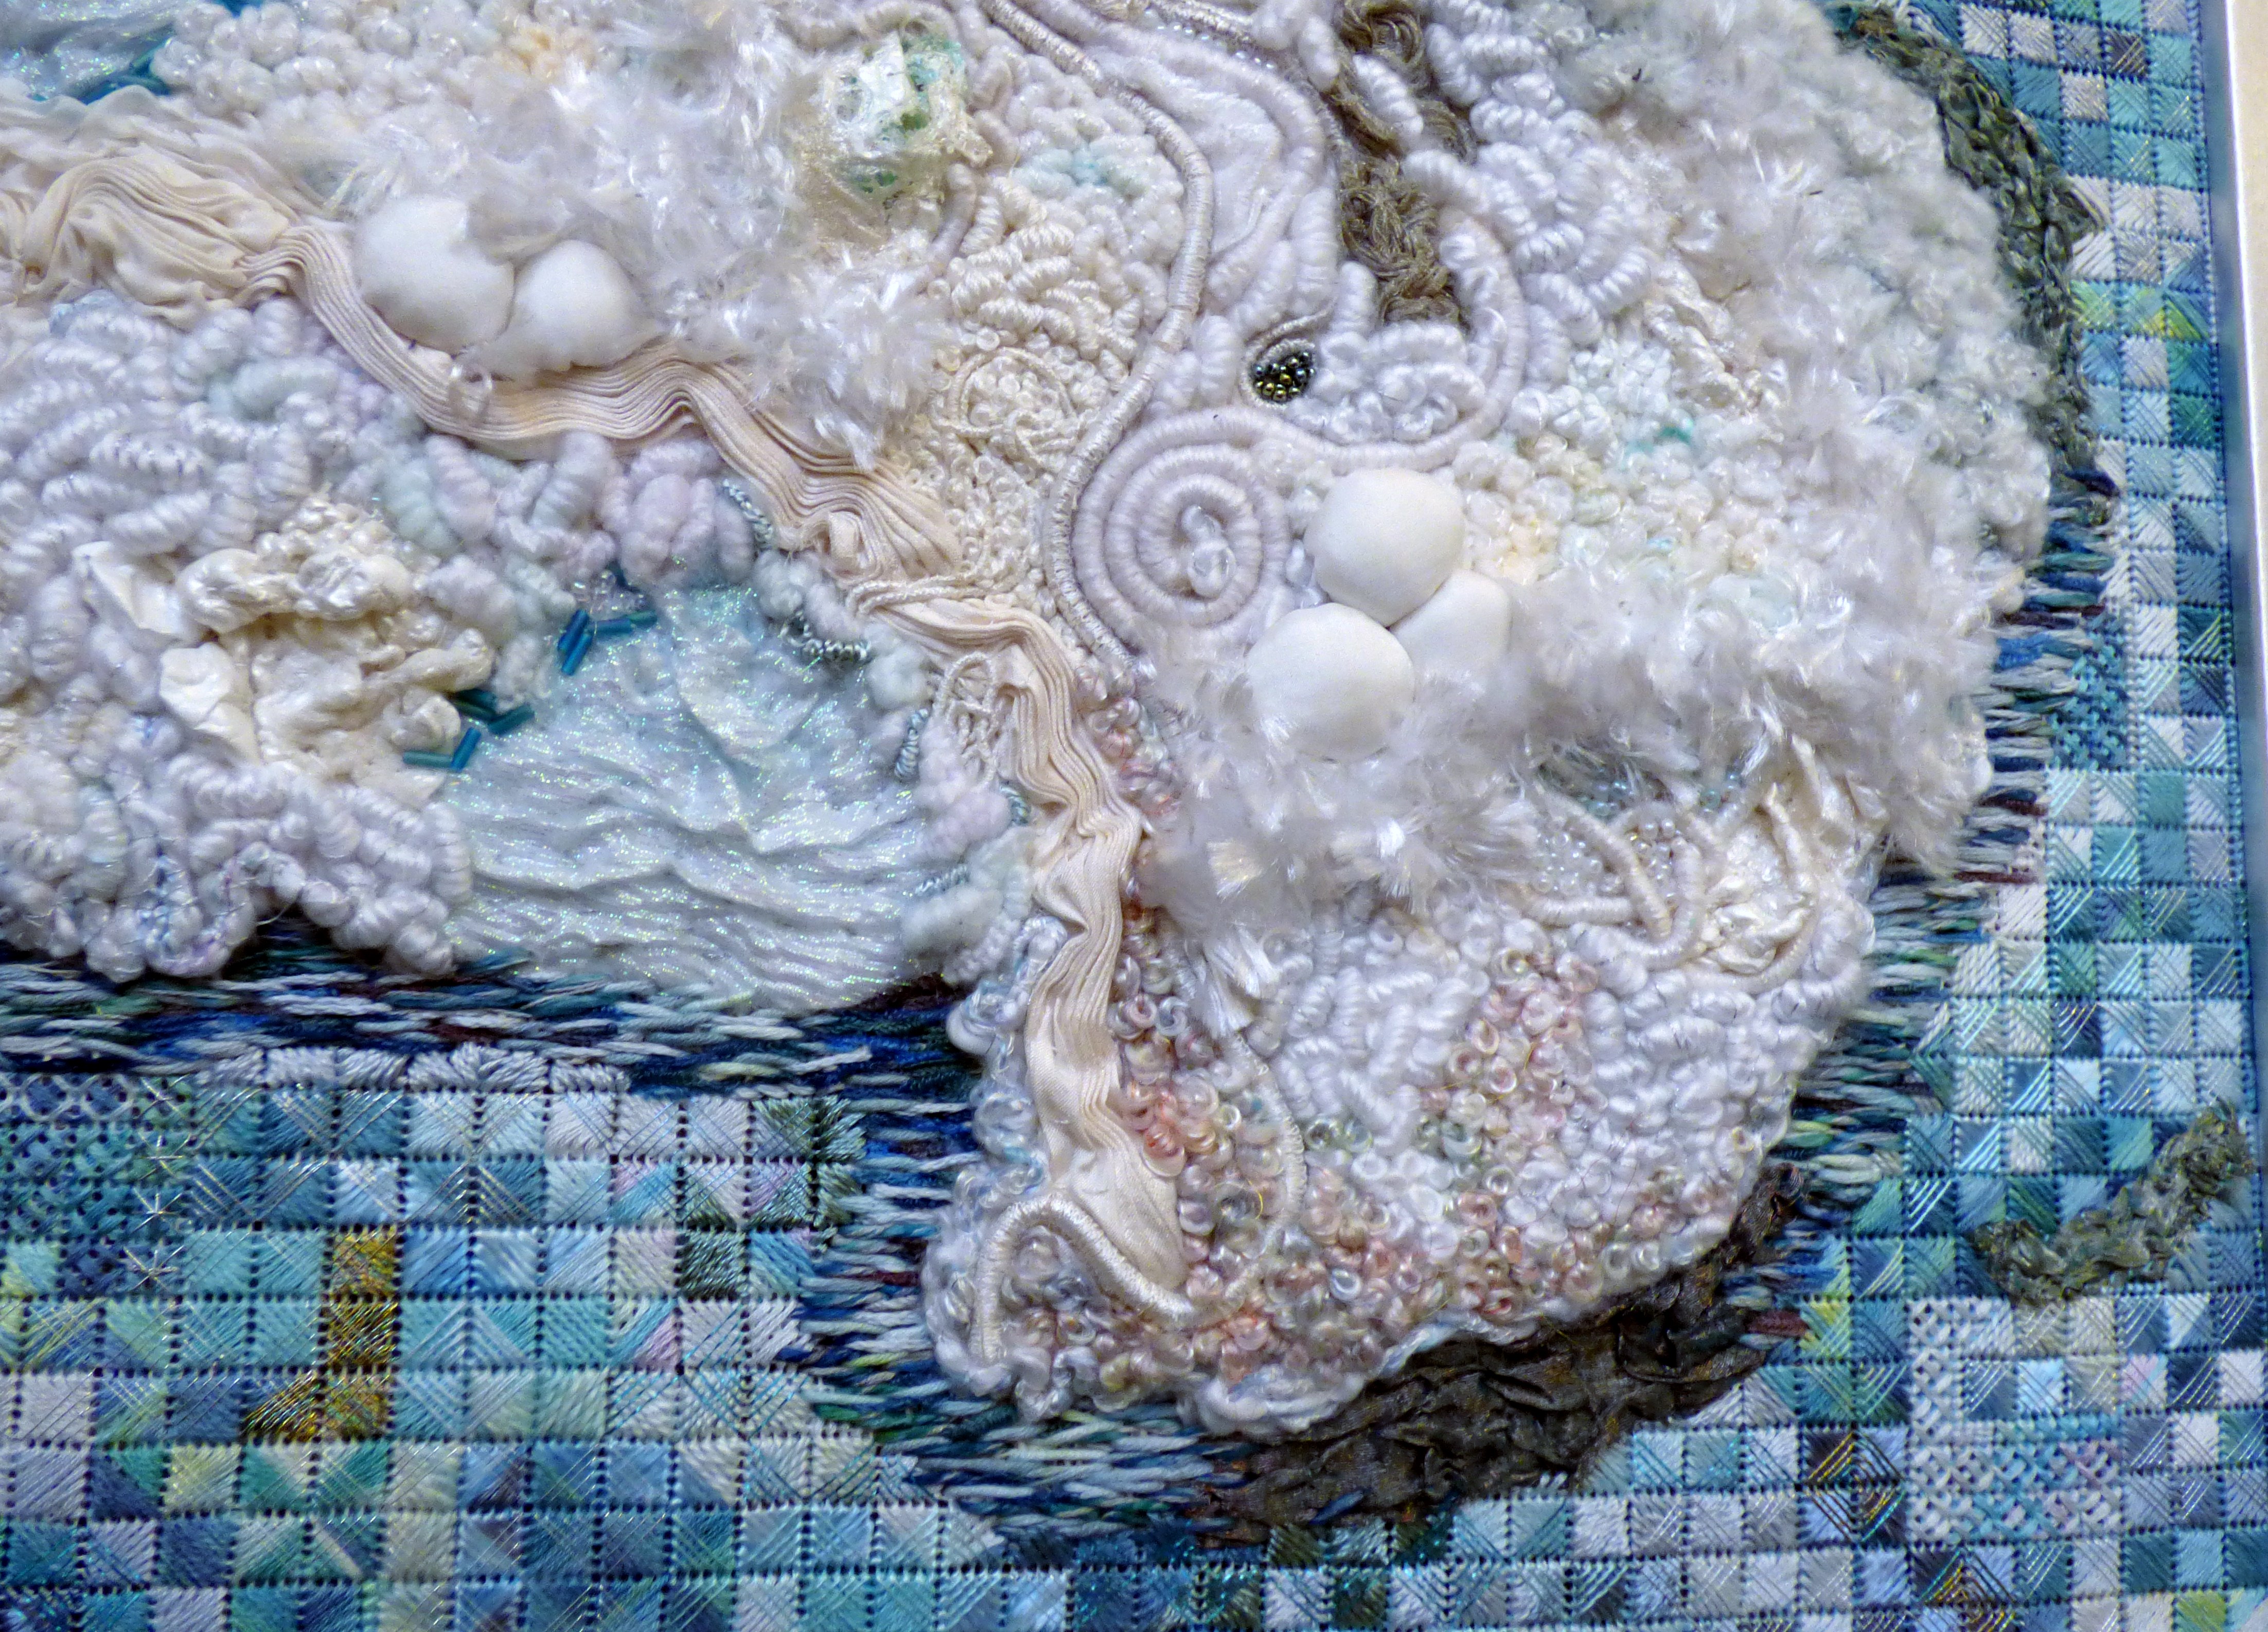 (detail) CONTINENT OF ANTARCTICA, hand stitching